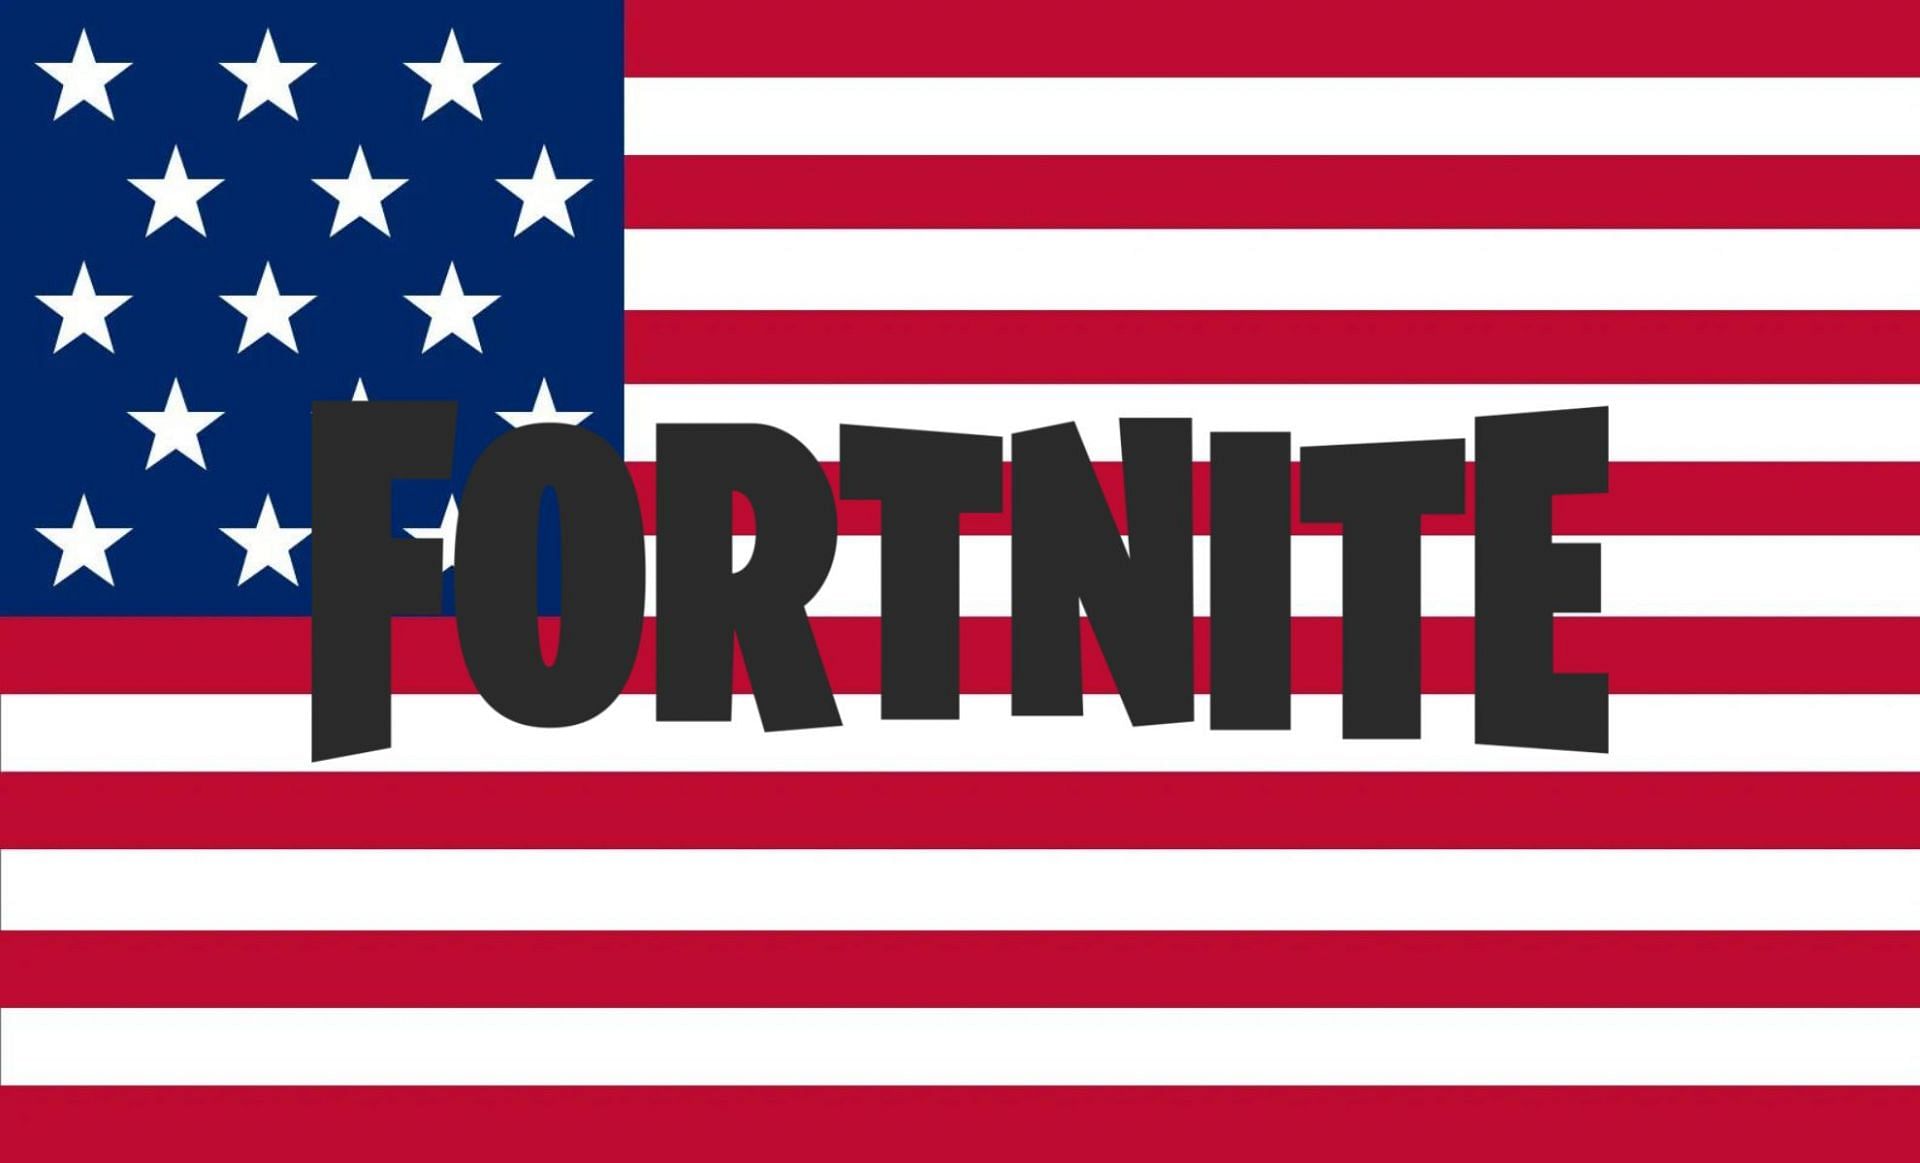 The United States (Images via Epic Games, Encyclopedia Brittanica)